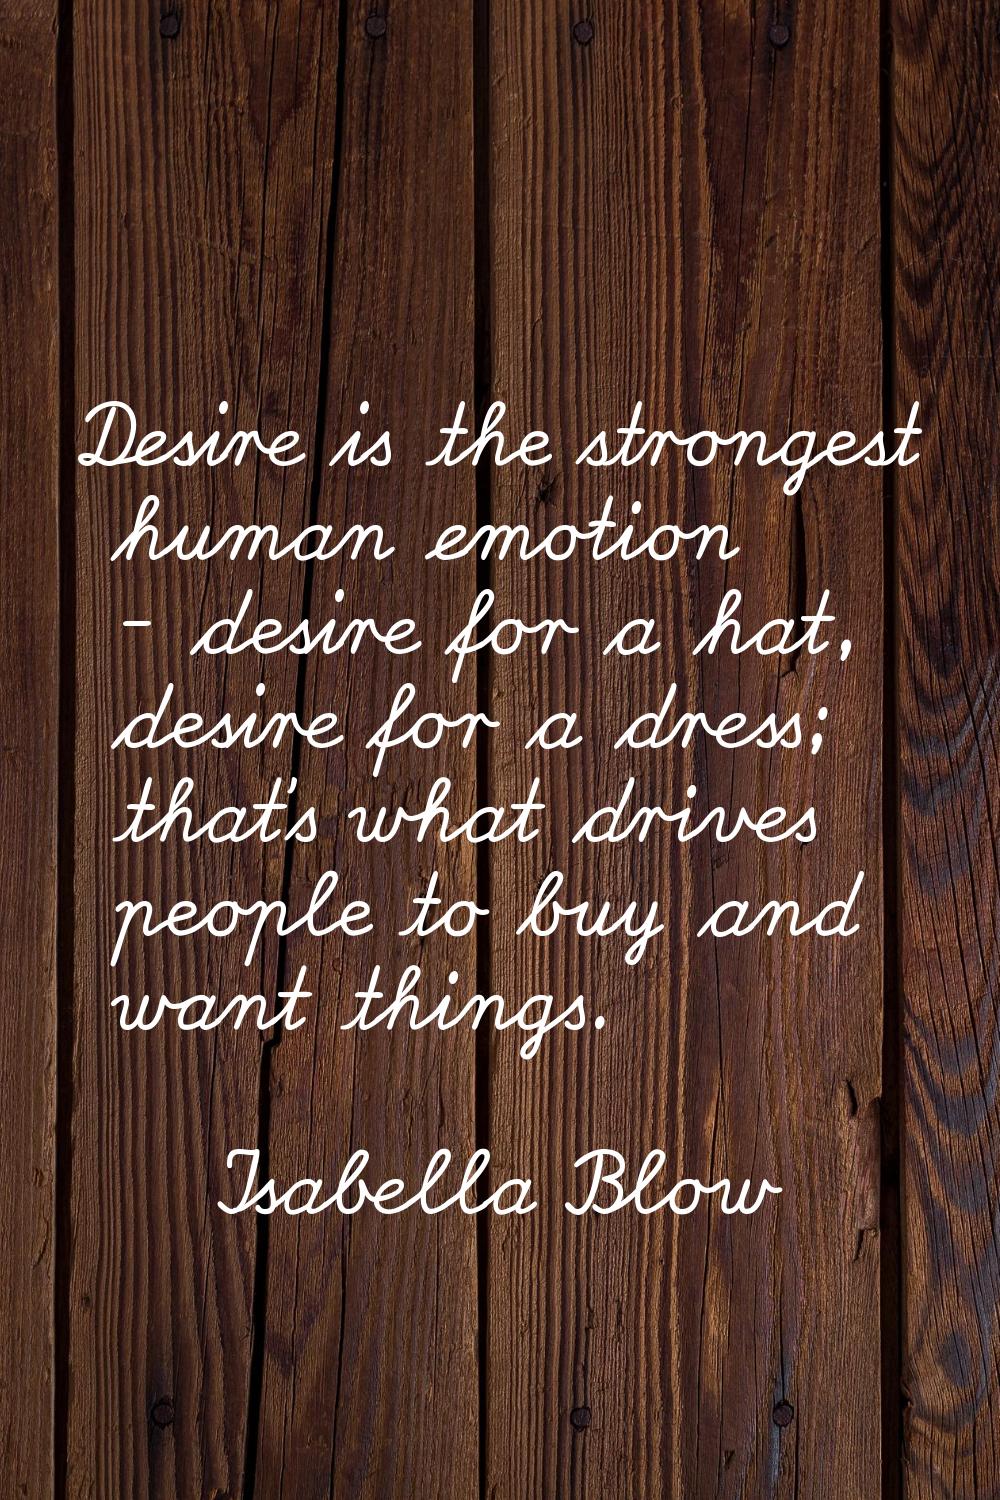 Desire is the strongest human emotion - desire for a hat, desire for a dress; that's what drives pe